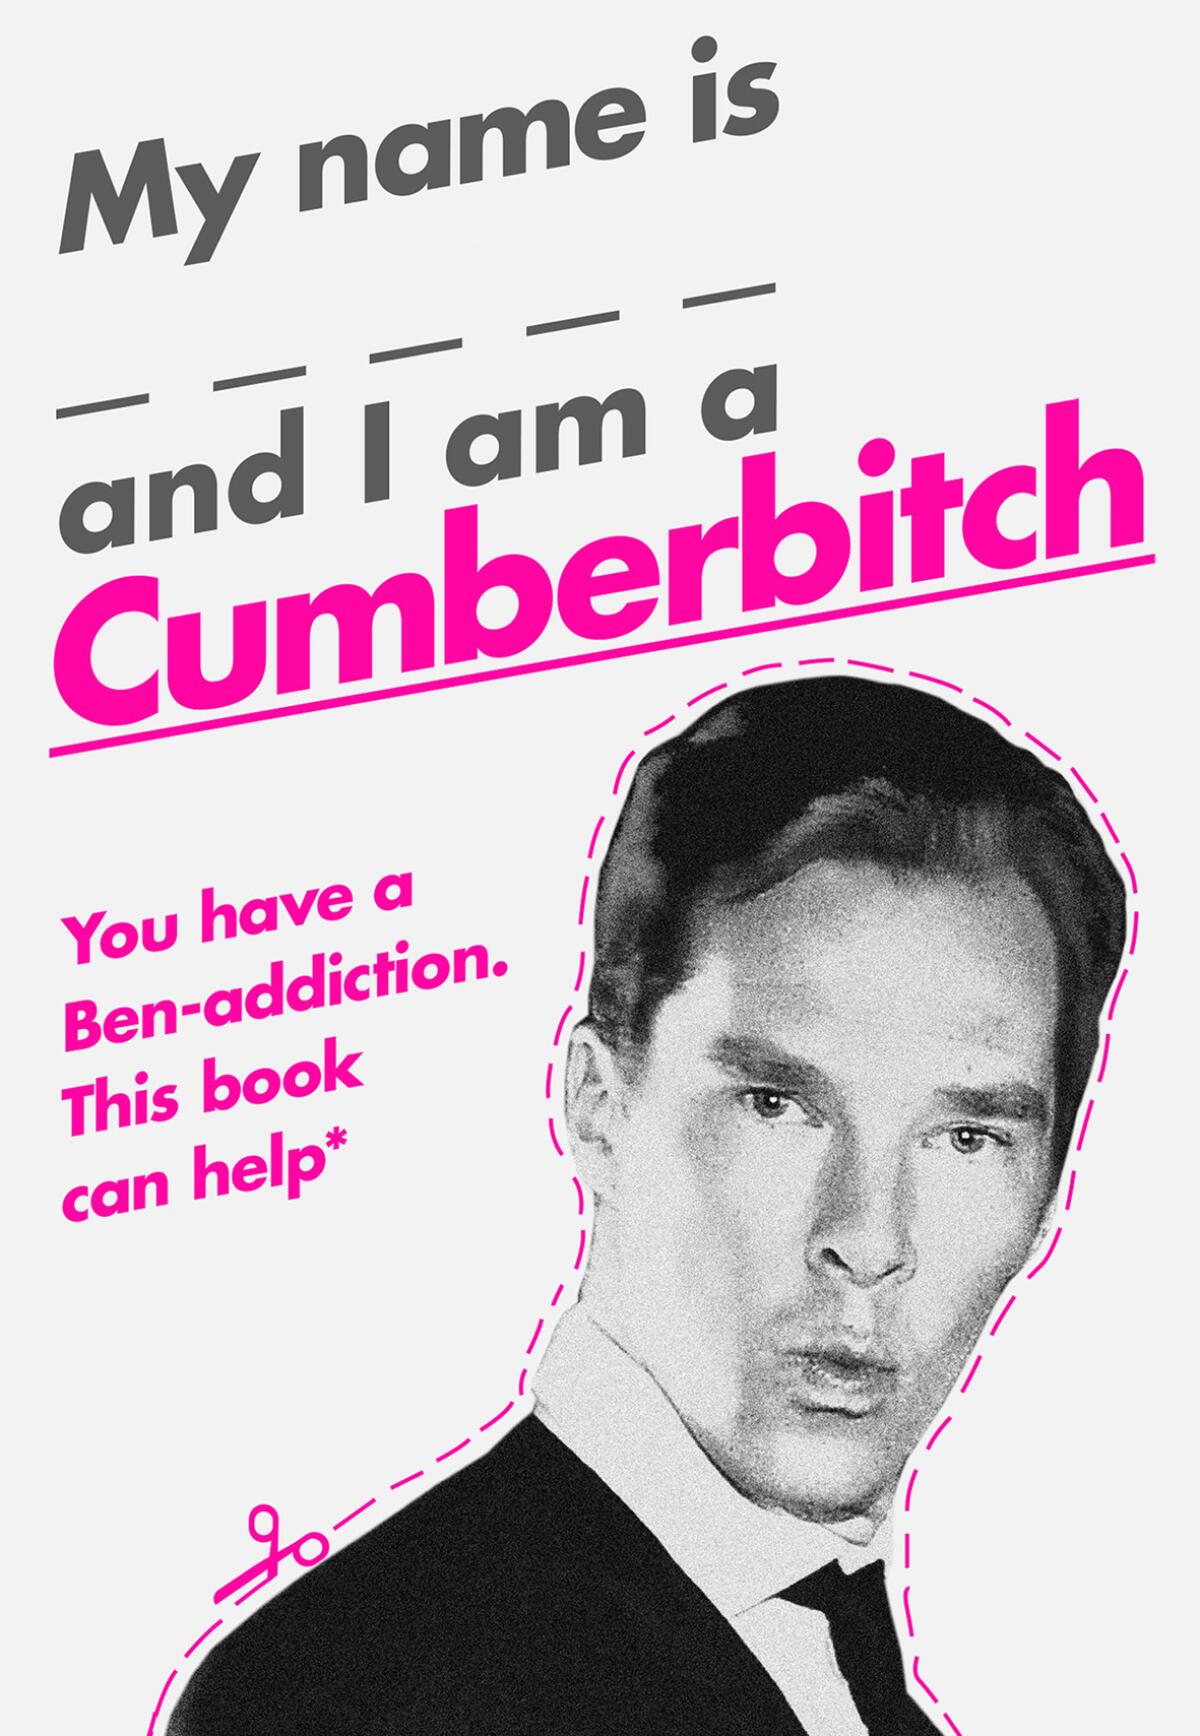 "My Name Is X and I Am A Cumberbitch" by Emily Barrett and Alexi Penfold